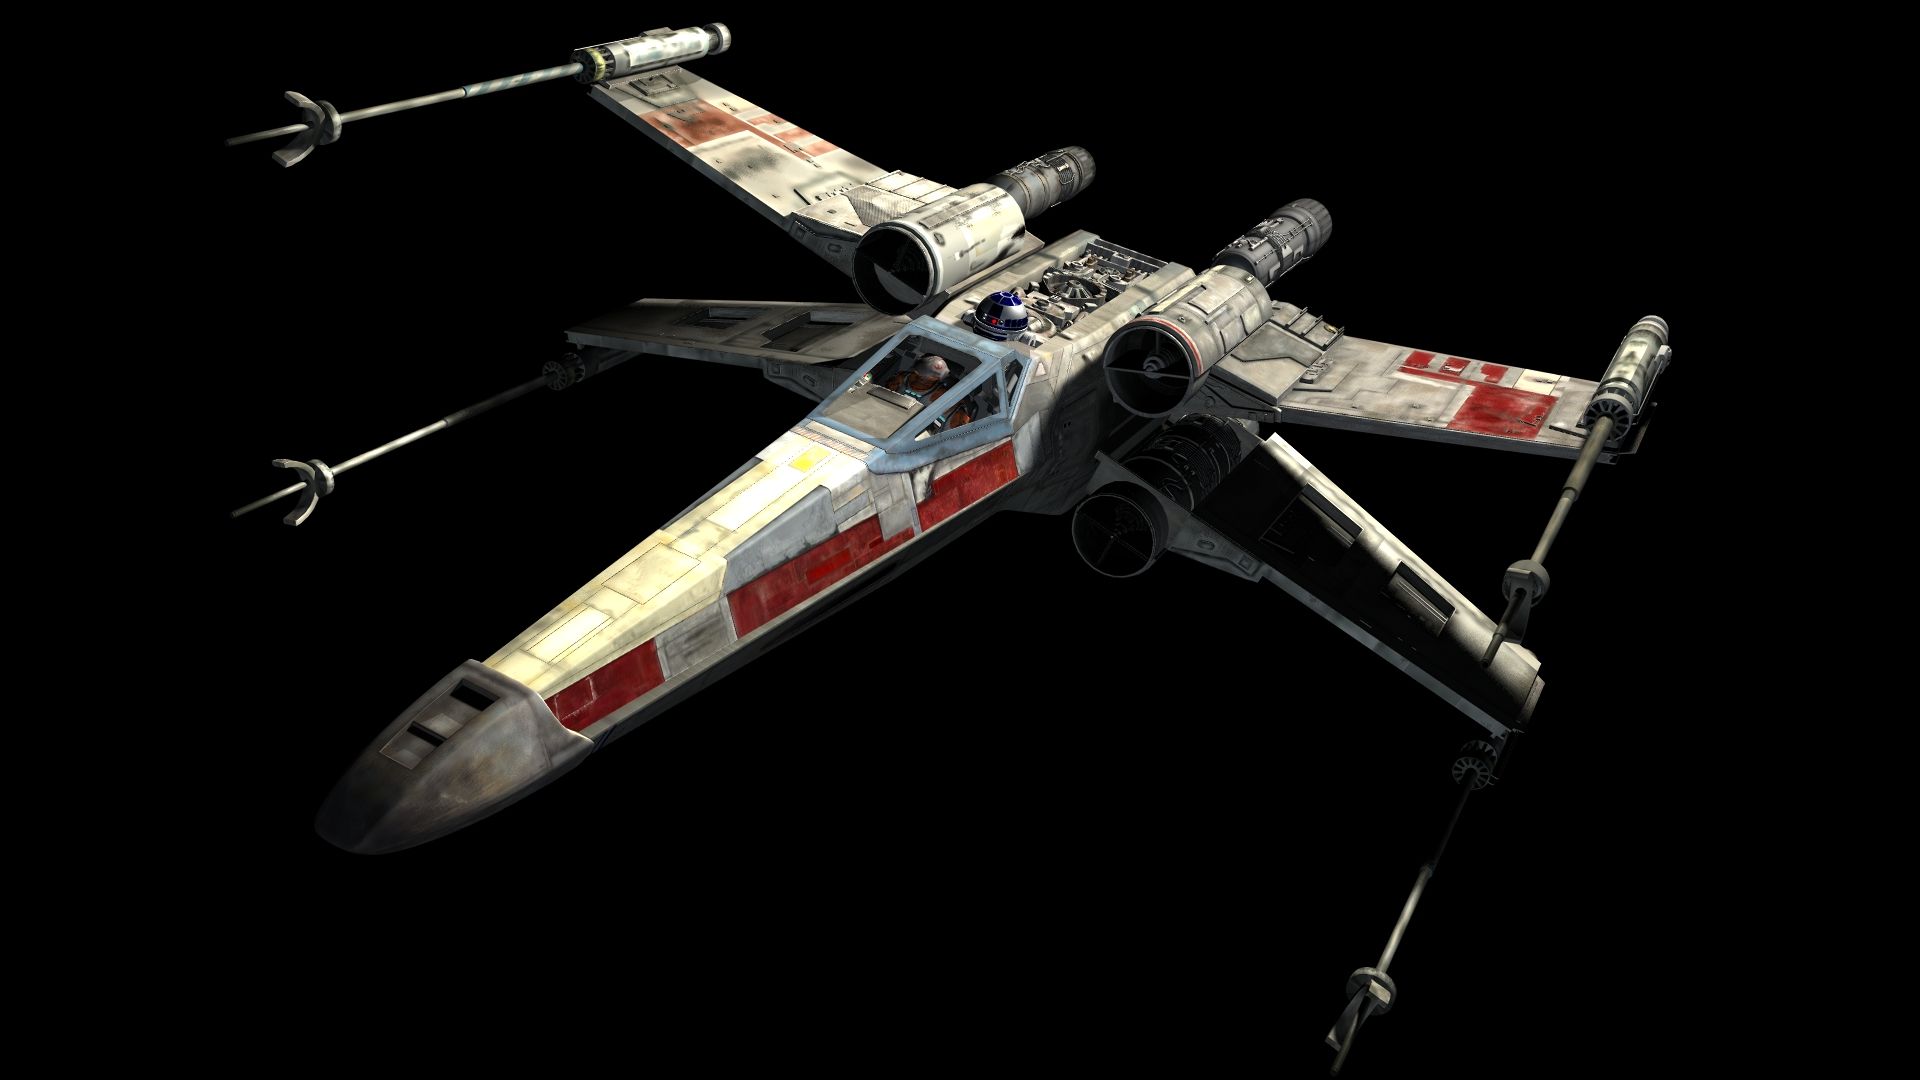 https://www.eclectric-fx.com/model/images/xwing.jpg